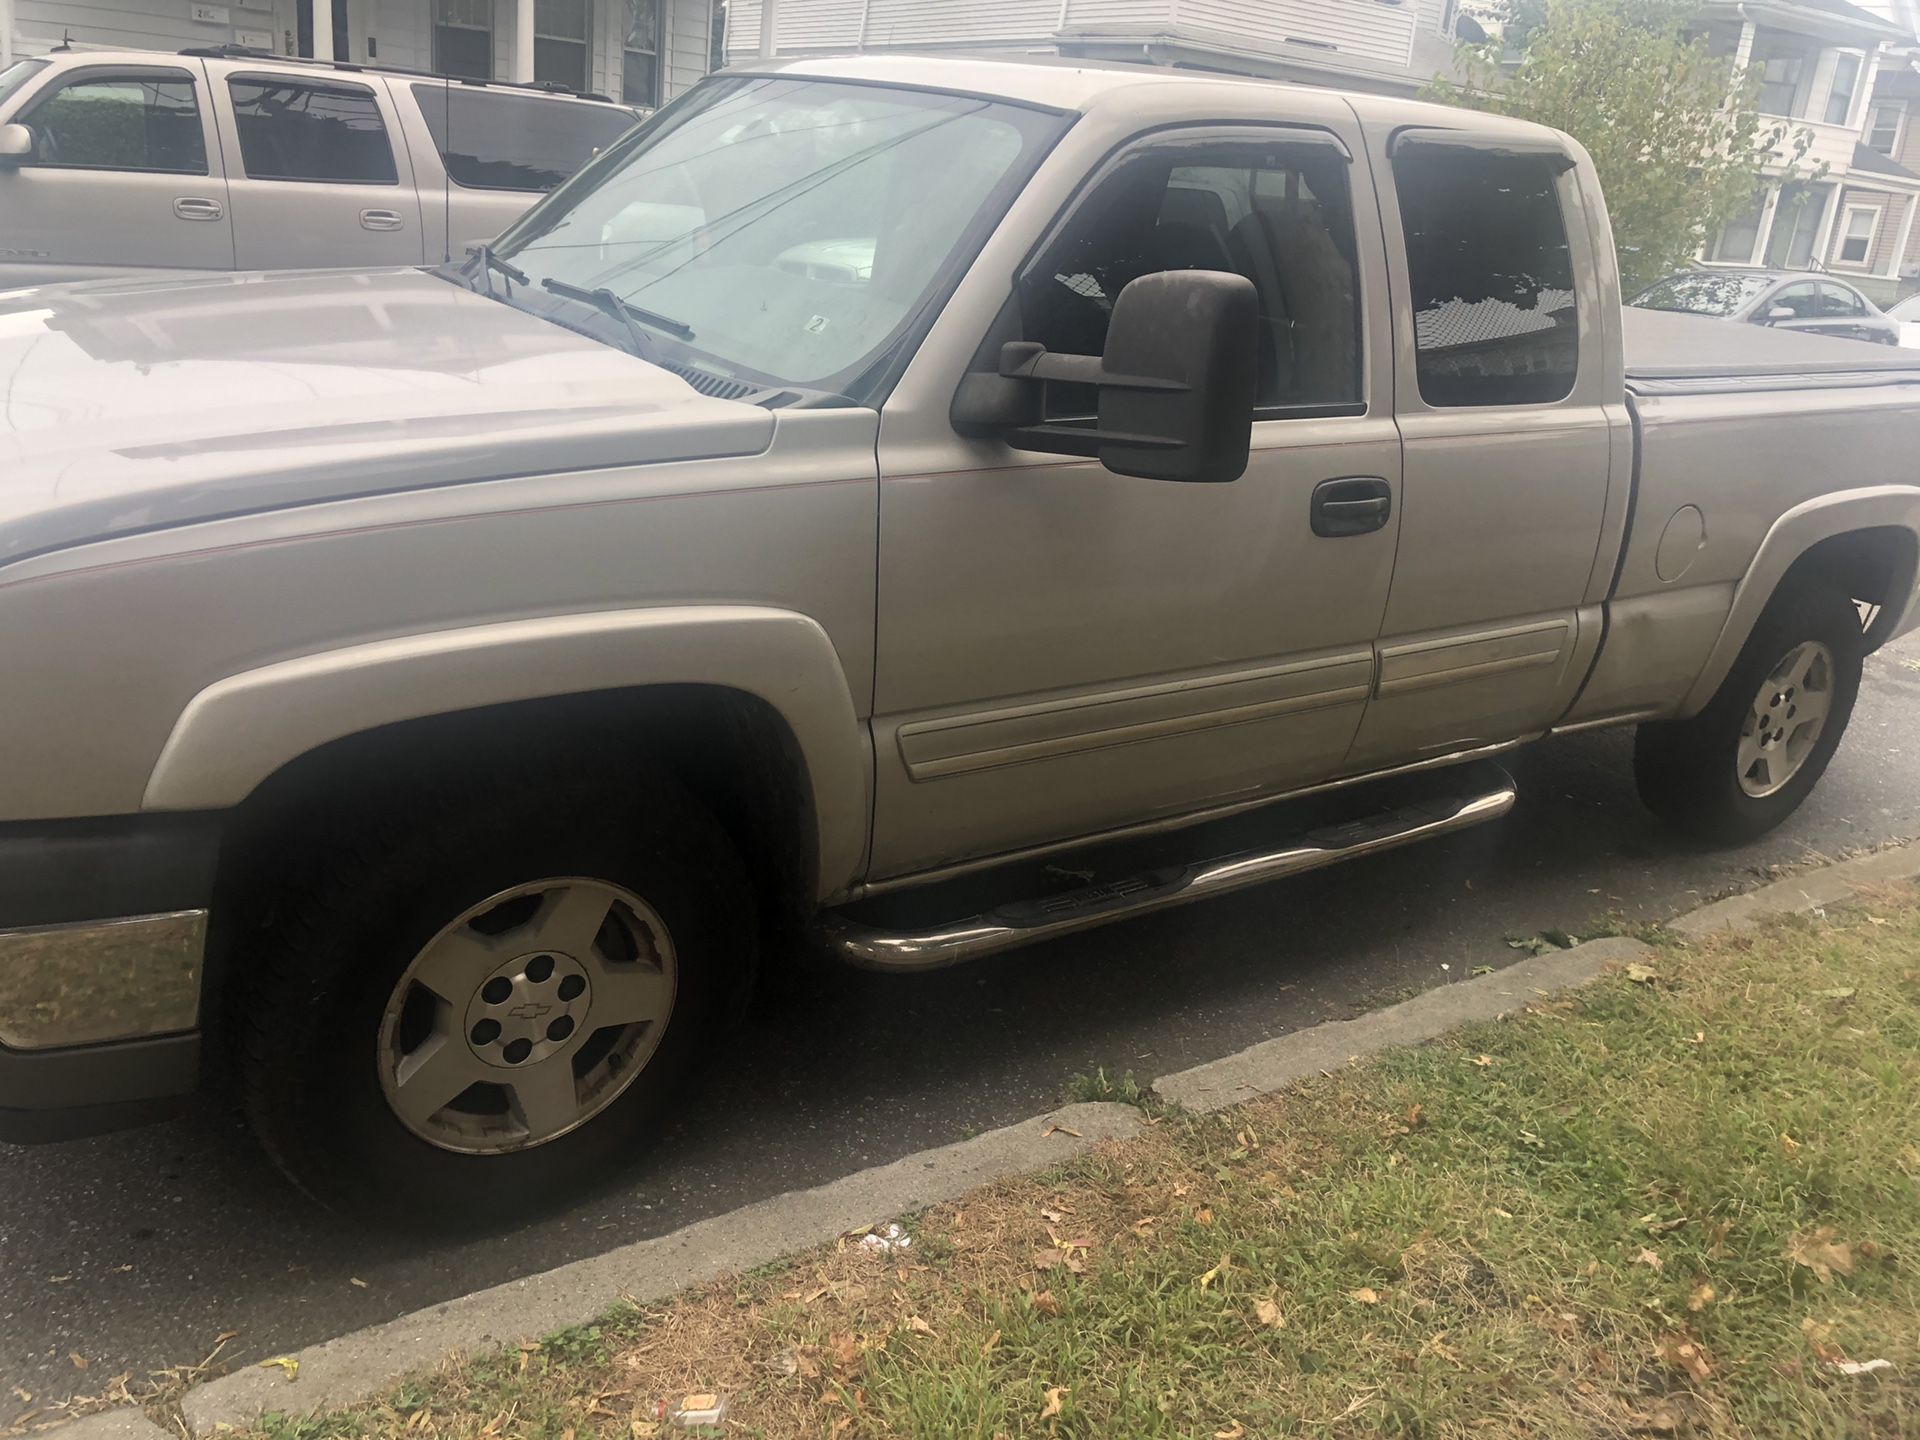 2005 chevy silverado in good condition 143,000 miles an owner had a gps flashback camera